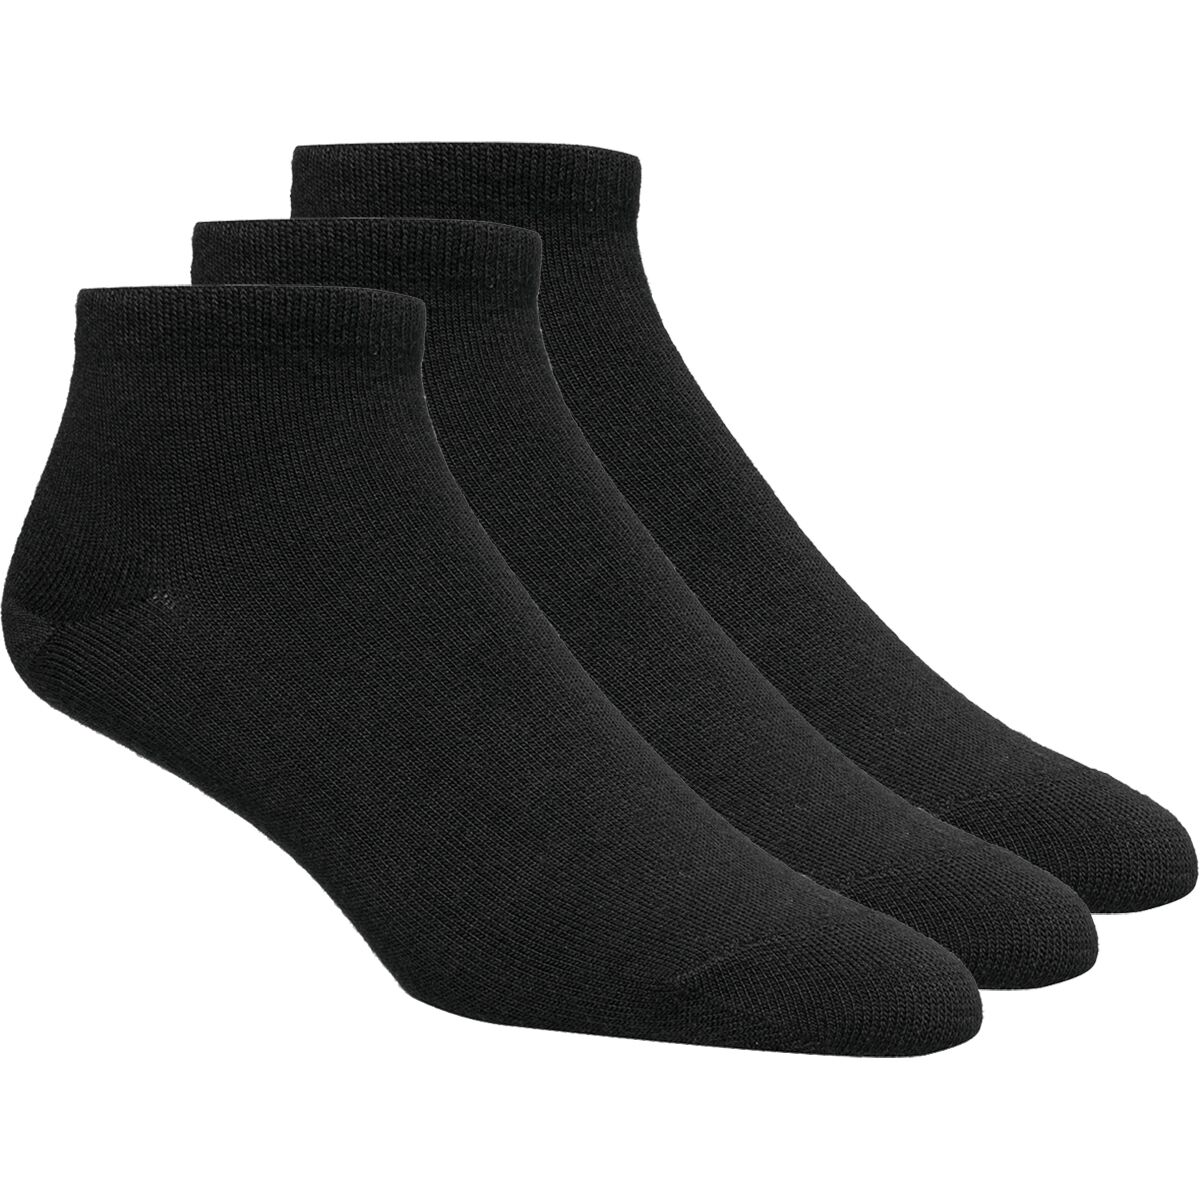 Stoic No-Show Hiking Sock - 3-Pack - Men's